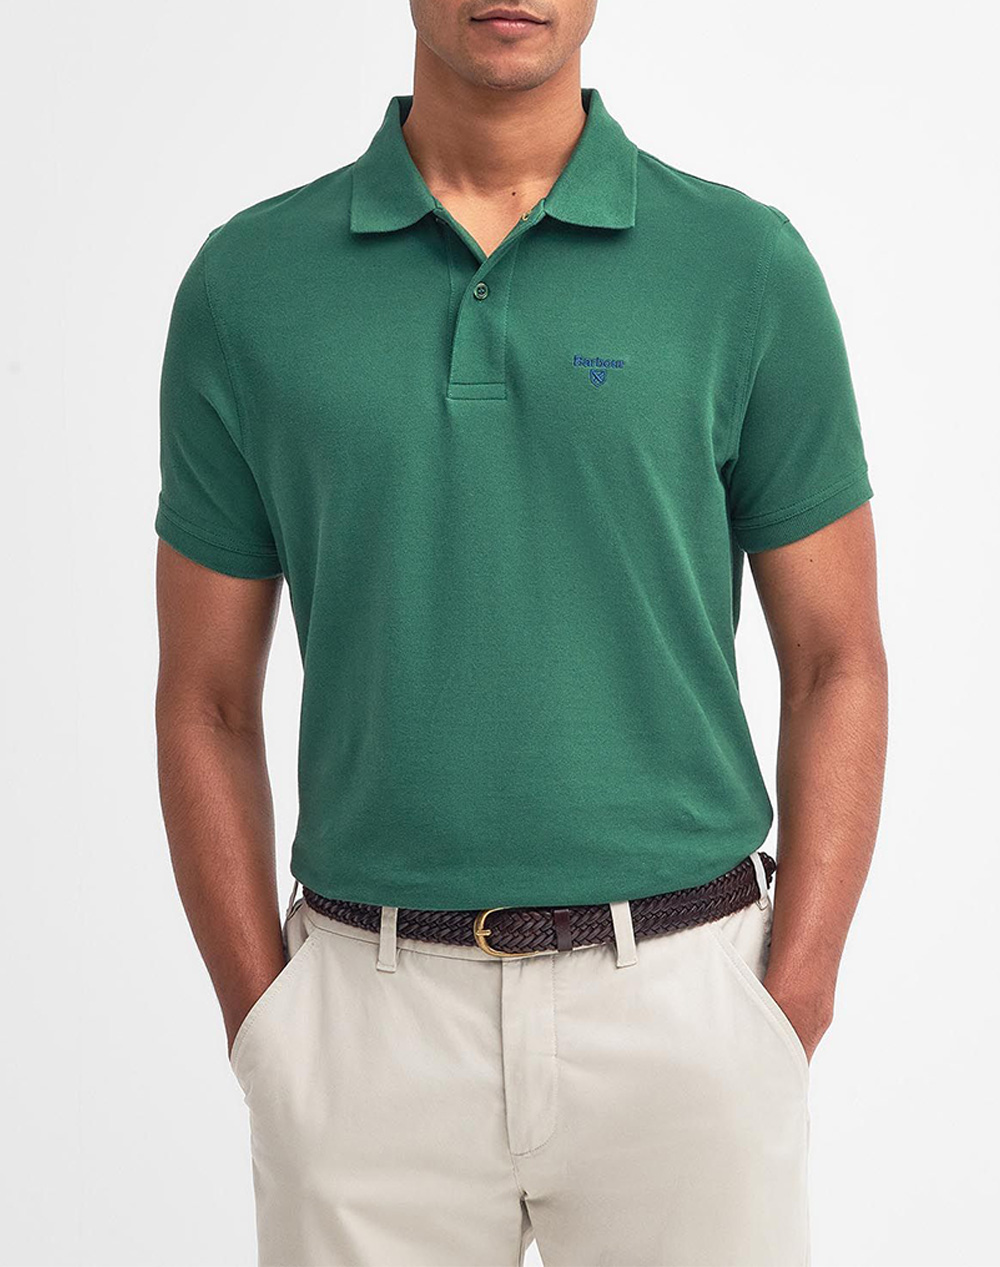 BARBOUR BARBOUR LIGHTWEIGHT SPORTS POLO ΜΠΛΟΥΖΑ POLO MML1367-BROL72.3 Green 3820ABARB3410029_XR28554